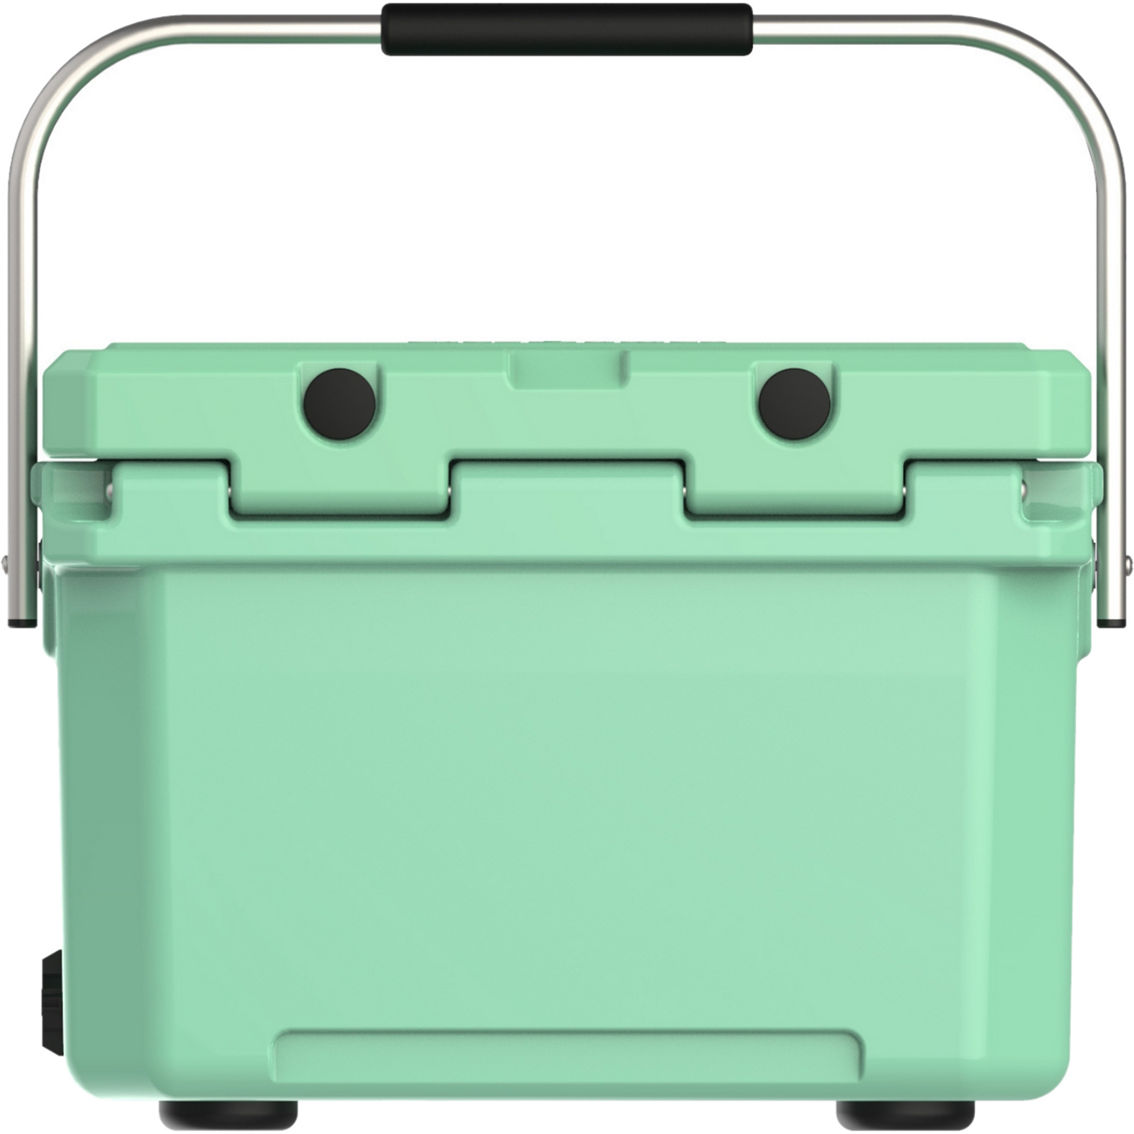 CAMP-ZERO 20L 21 qt. Premium Cooler with Four Molded In Beverage Holders - Image 2 of 7